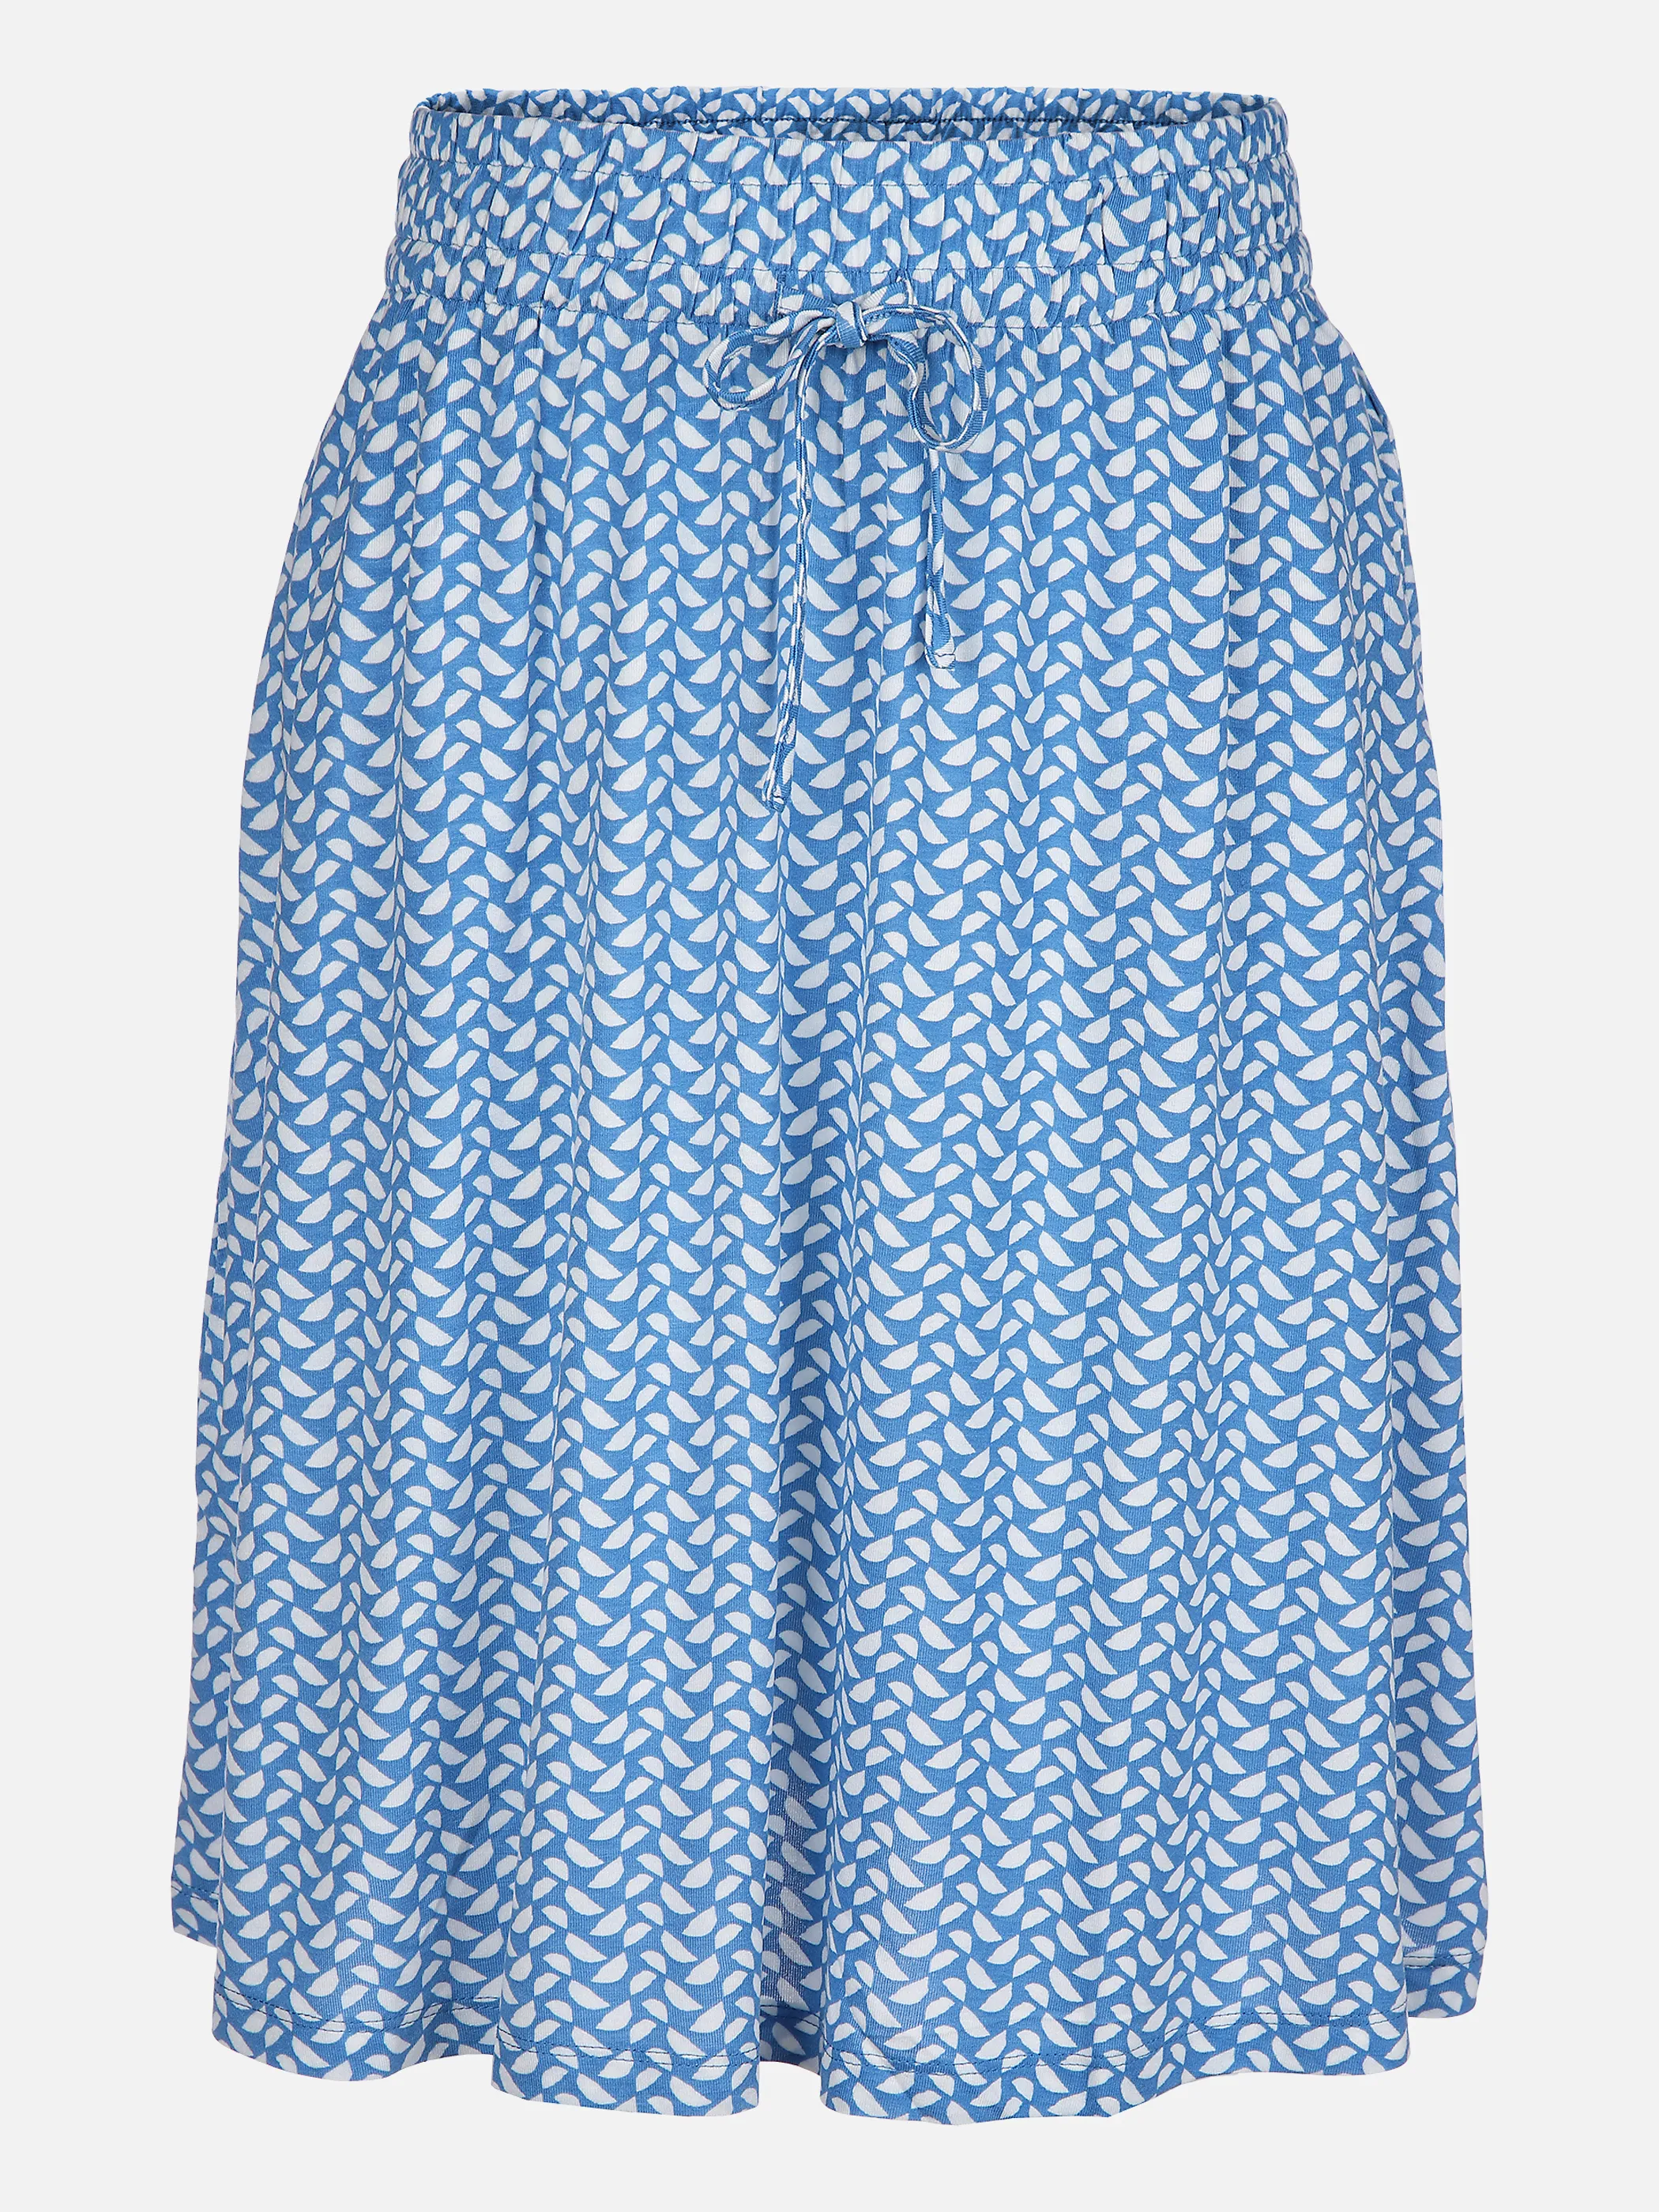 Tom Tailor 1031240 skirt with gathering Blau 865220 29526 1